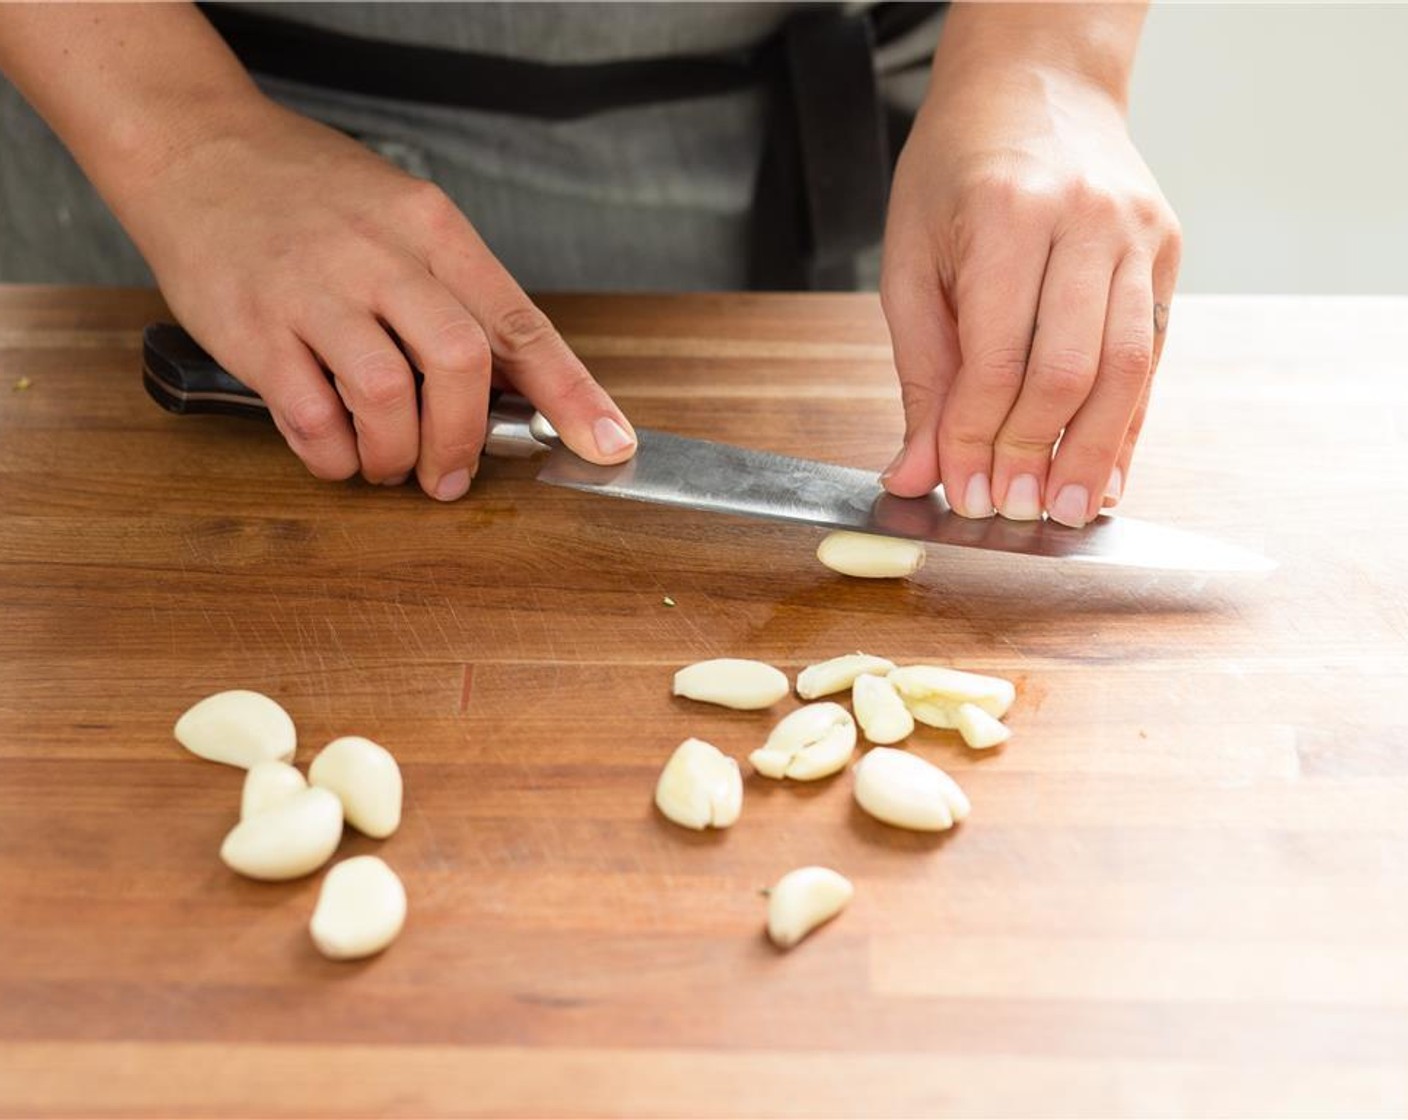 step 3 Pressing down with the flat side of the knife, smash the Garlic (20 cloves) and set aside.